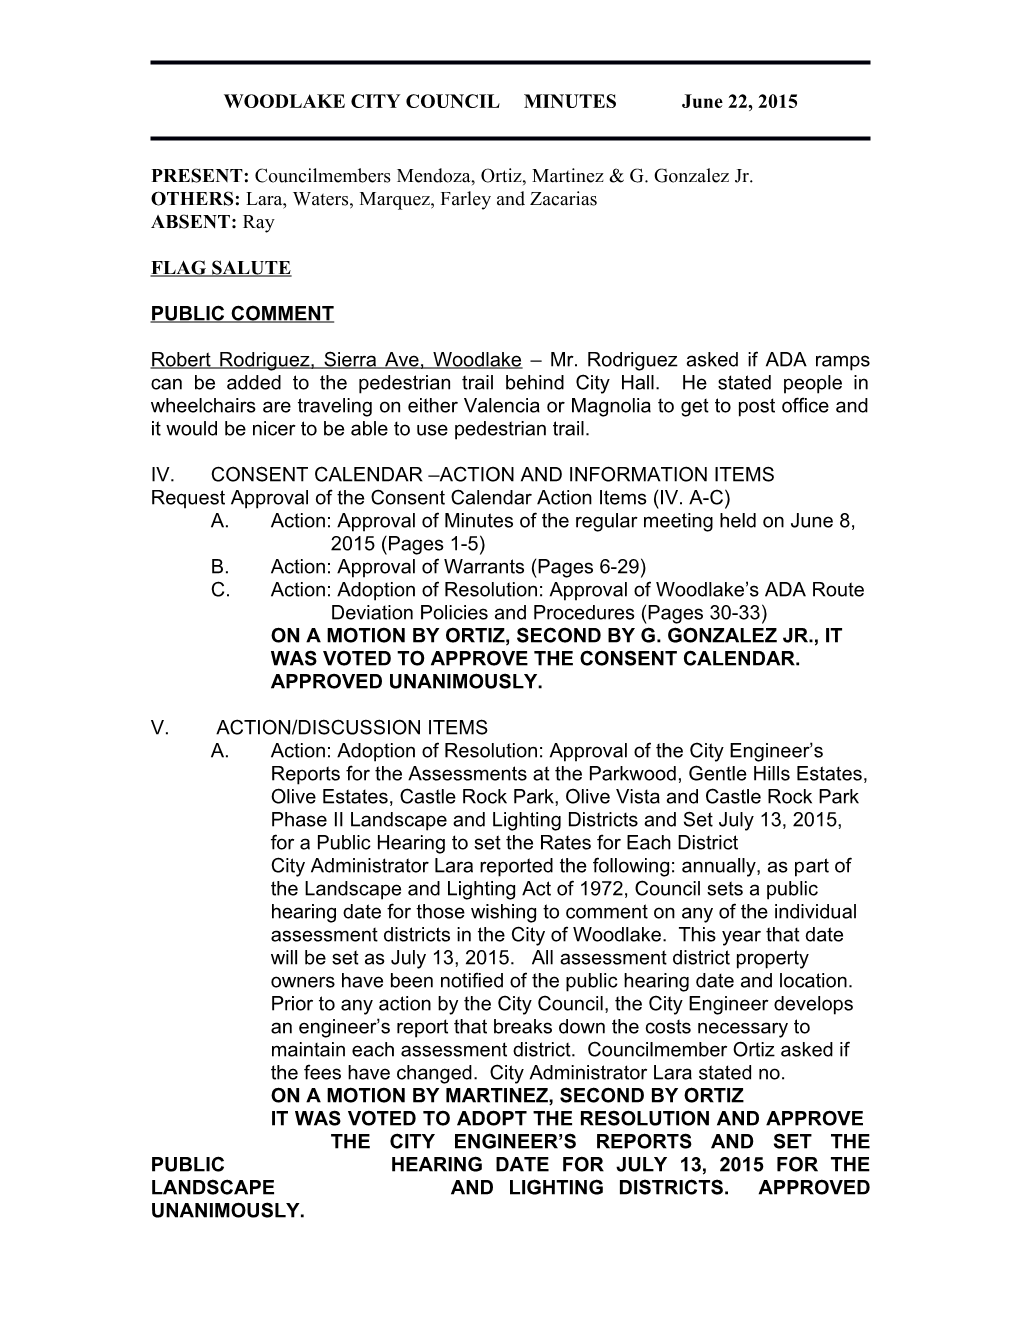 WOODLAKE CITY COUNCILMINUTES June 22, 2015